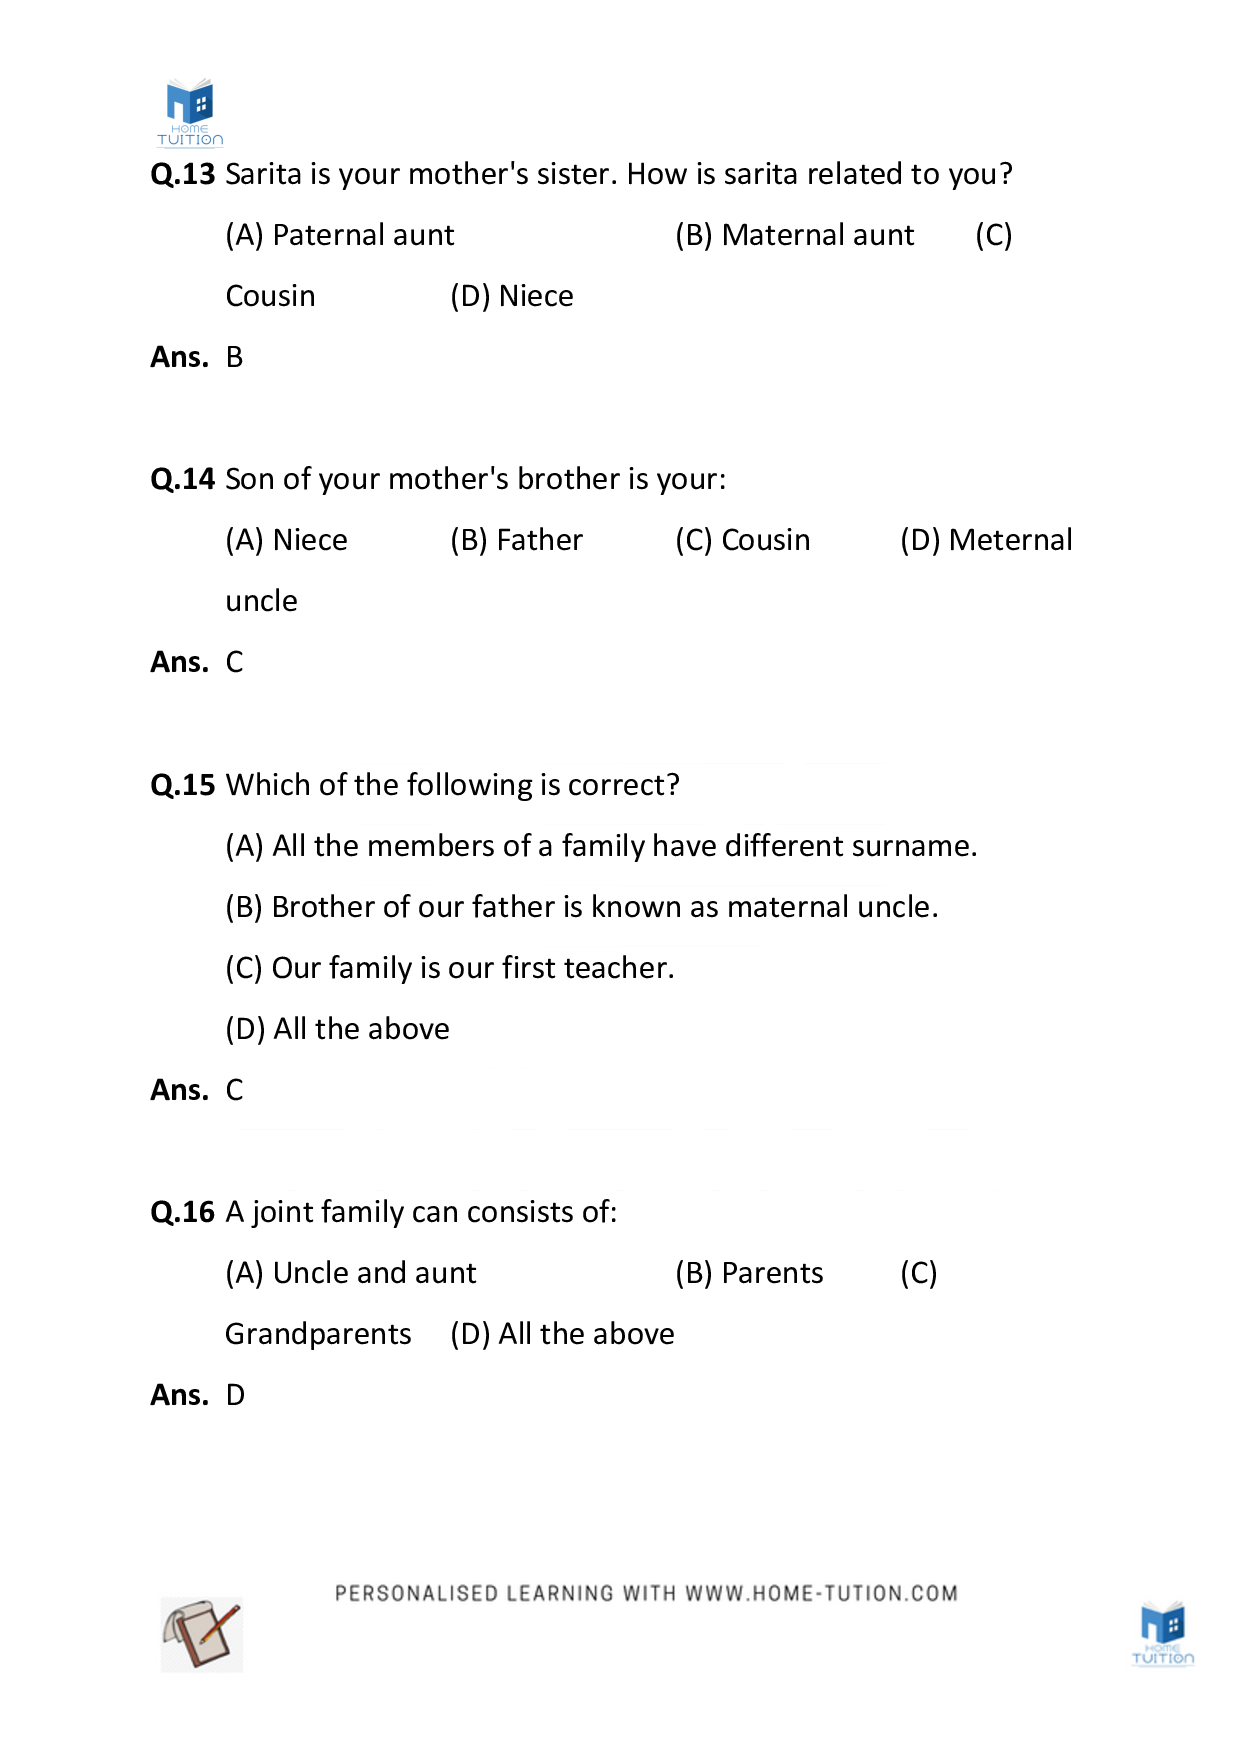 Worksheet For Chapter-1 - My Family And Relatives Questions and Answers